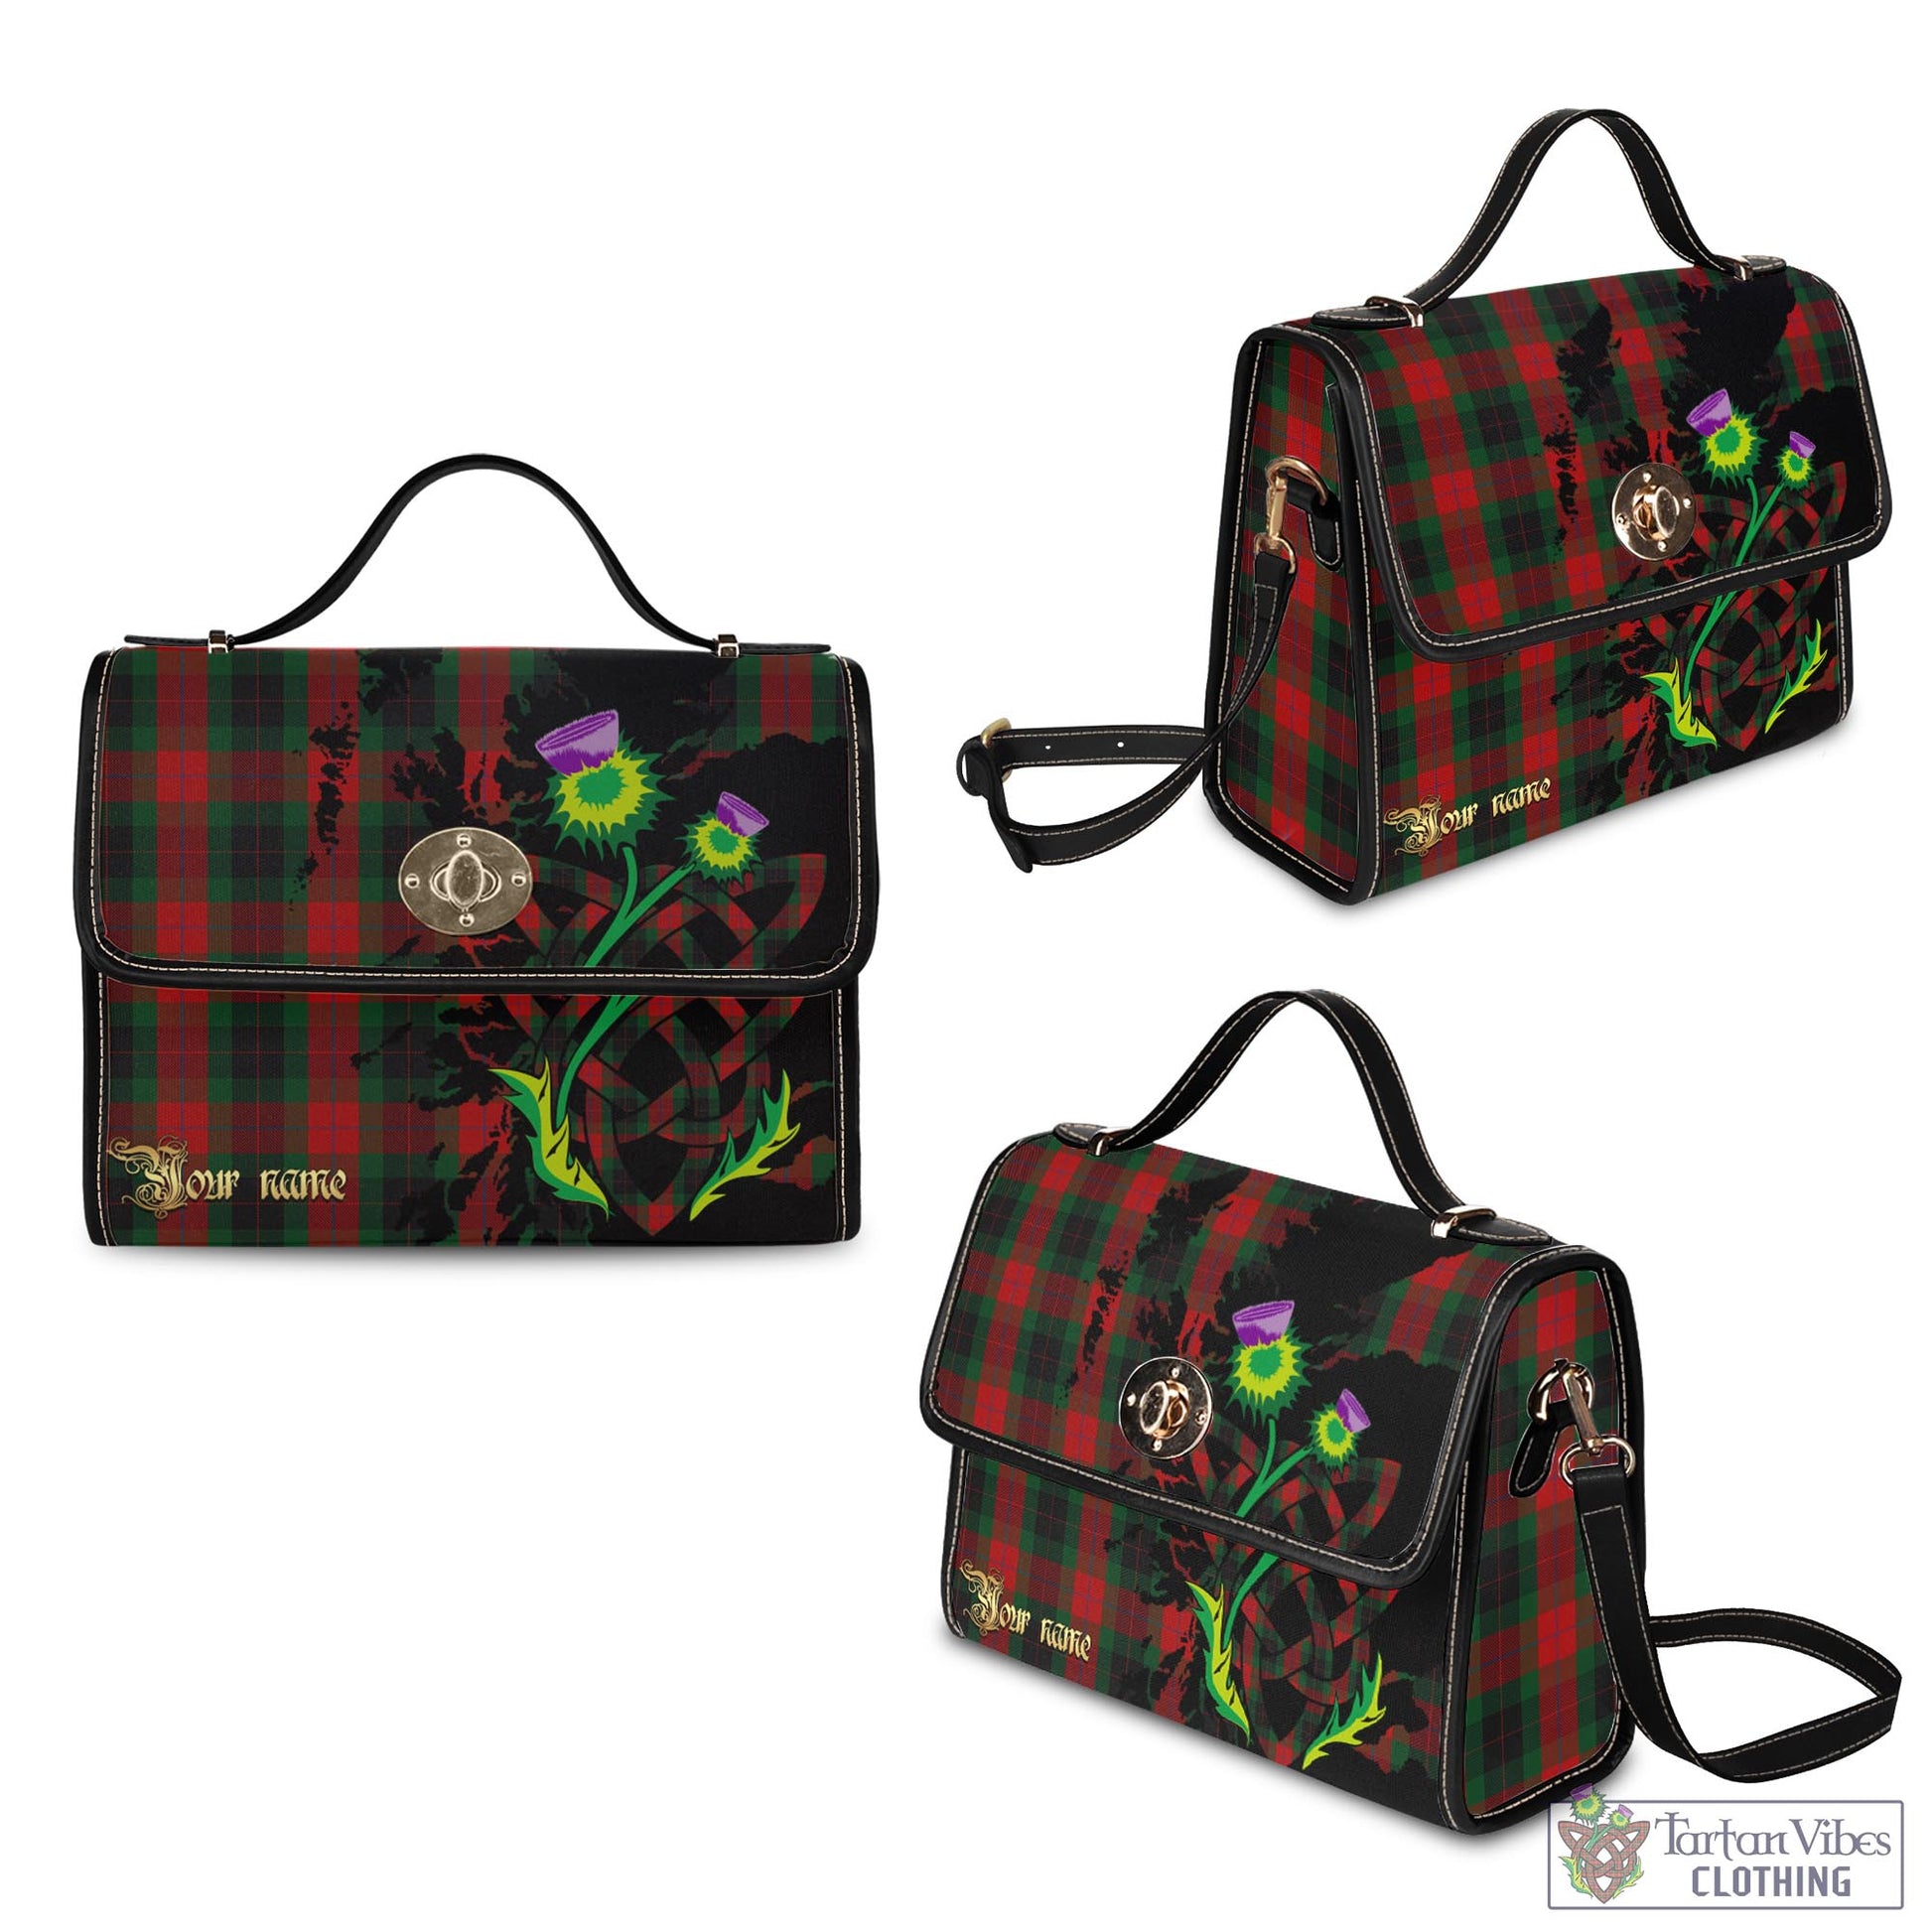 Tartan Vibes Clothing Skene of Cromar Black Tartan Waterproof Canvas Bag with Scotland Map and Thistle Celtic Accents